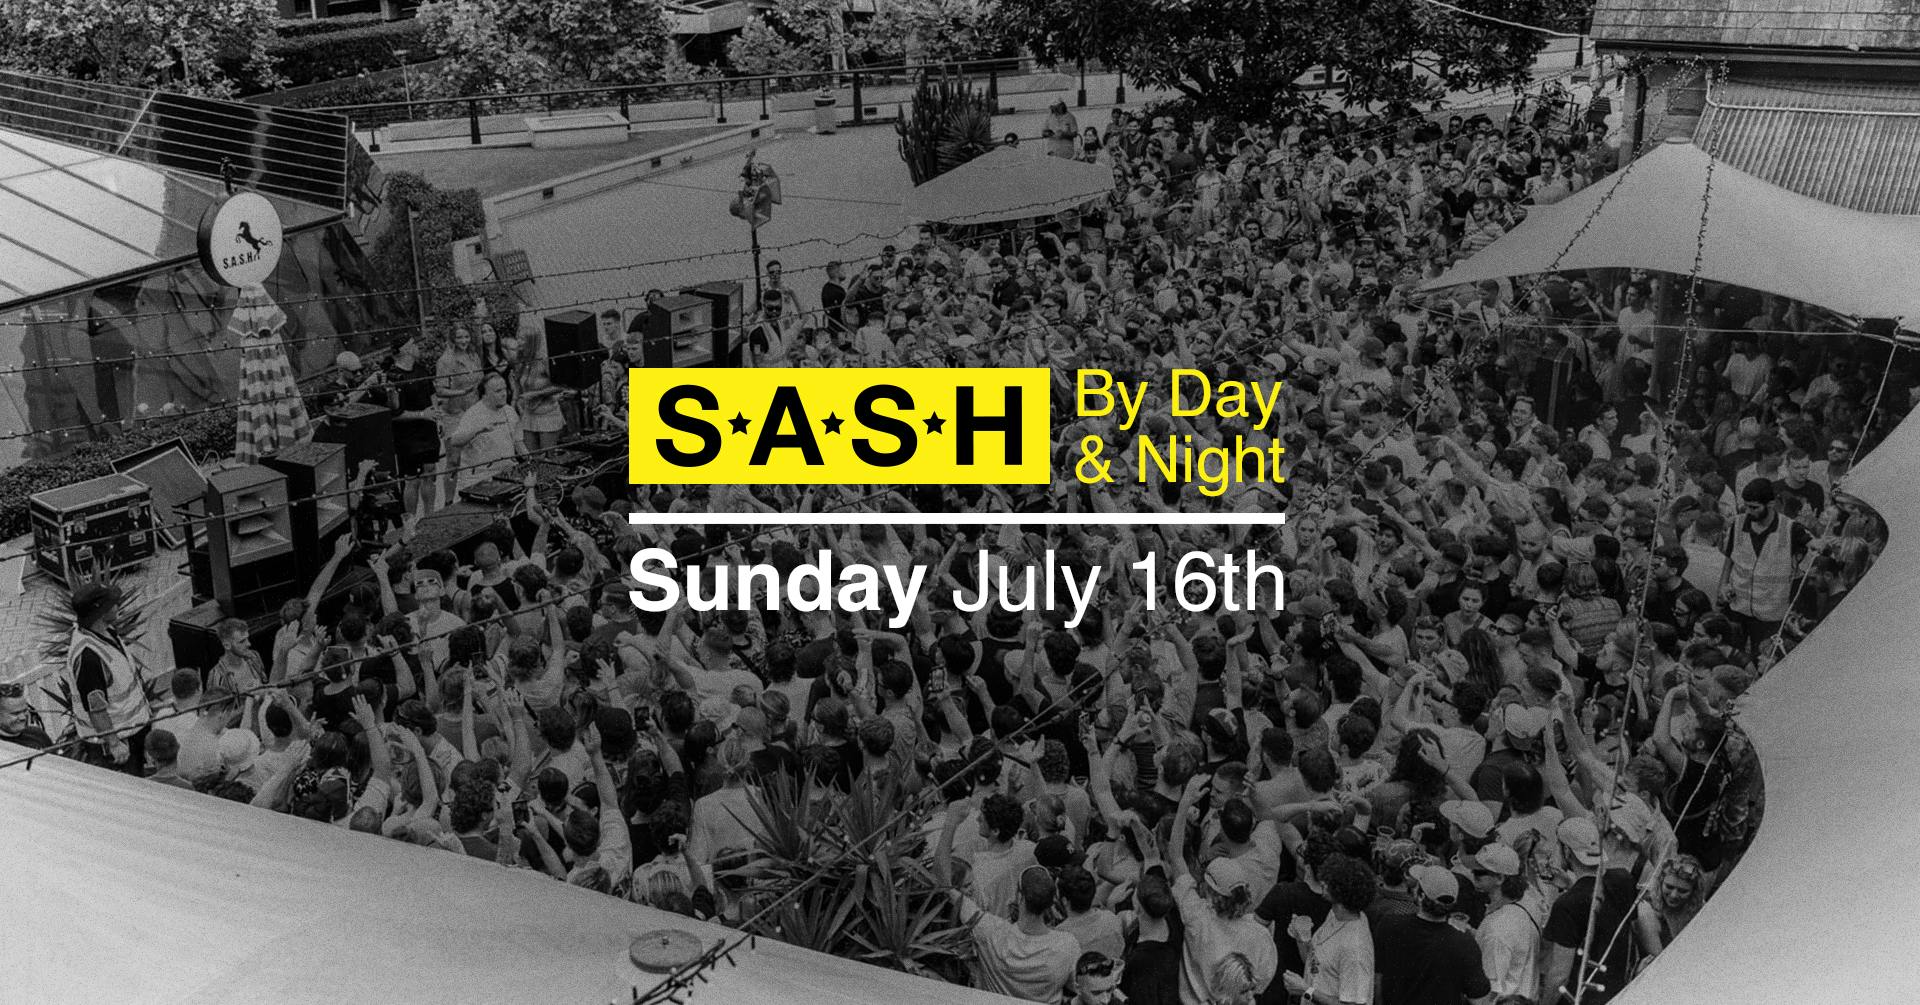 S.A.S.H By Day & Night July 16th